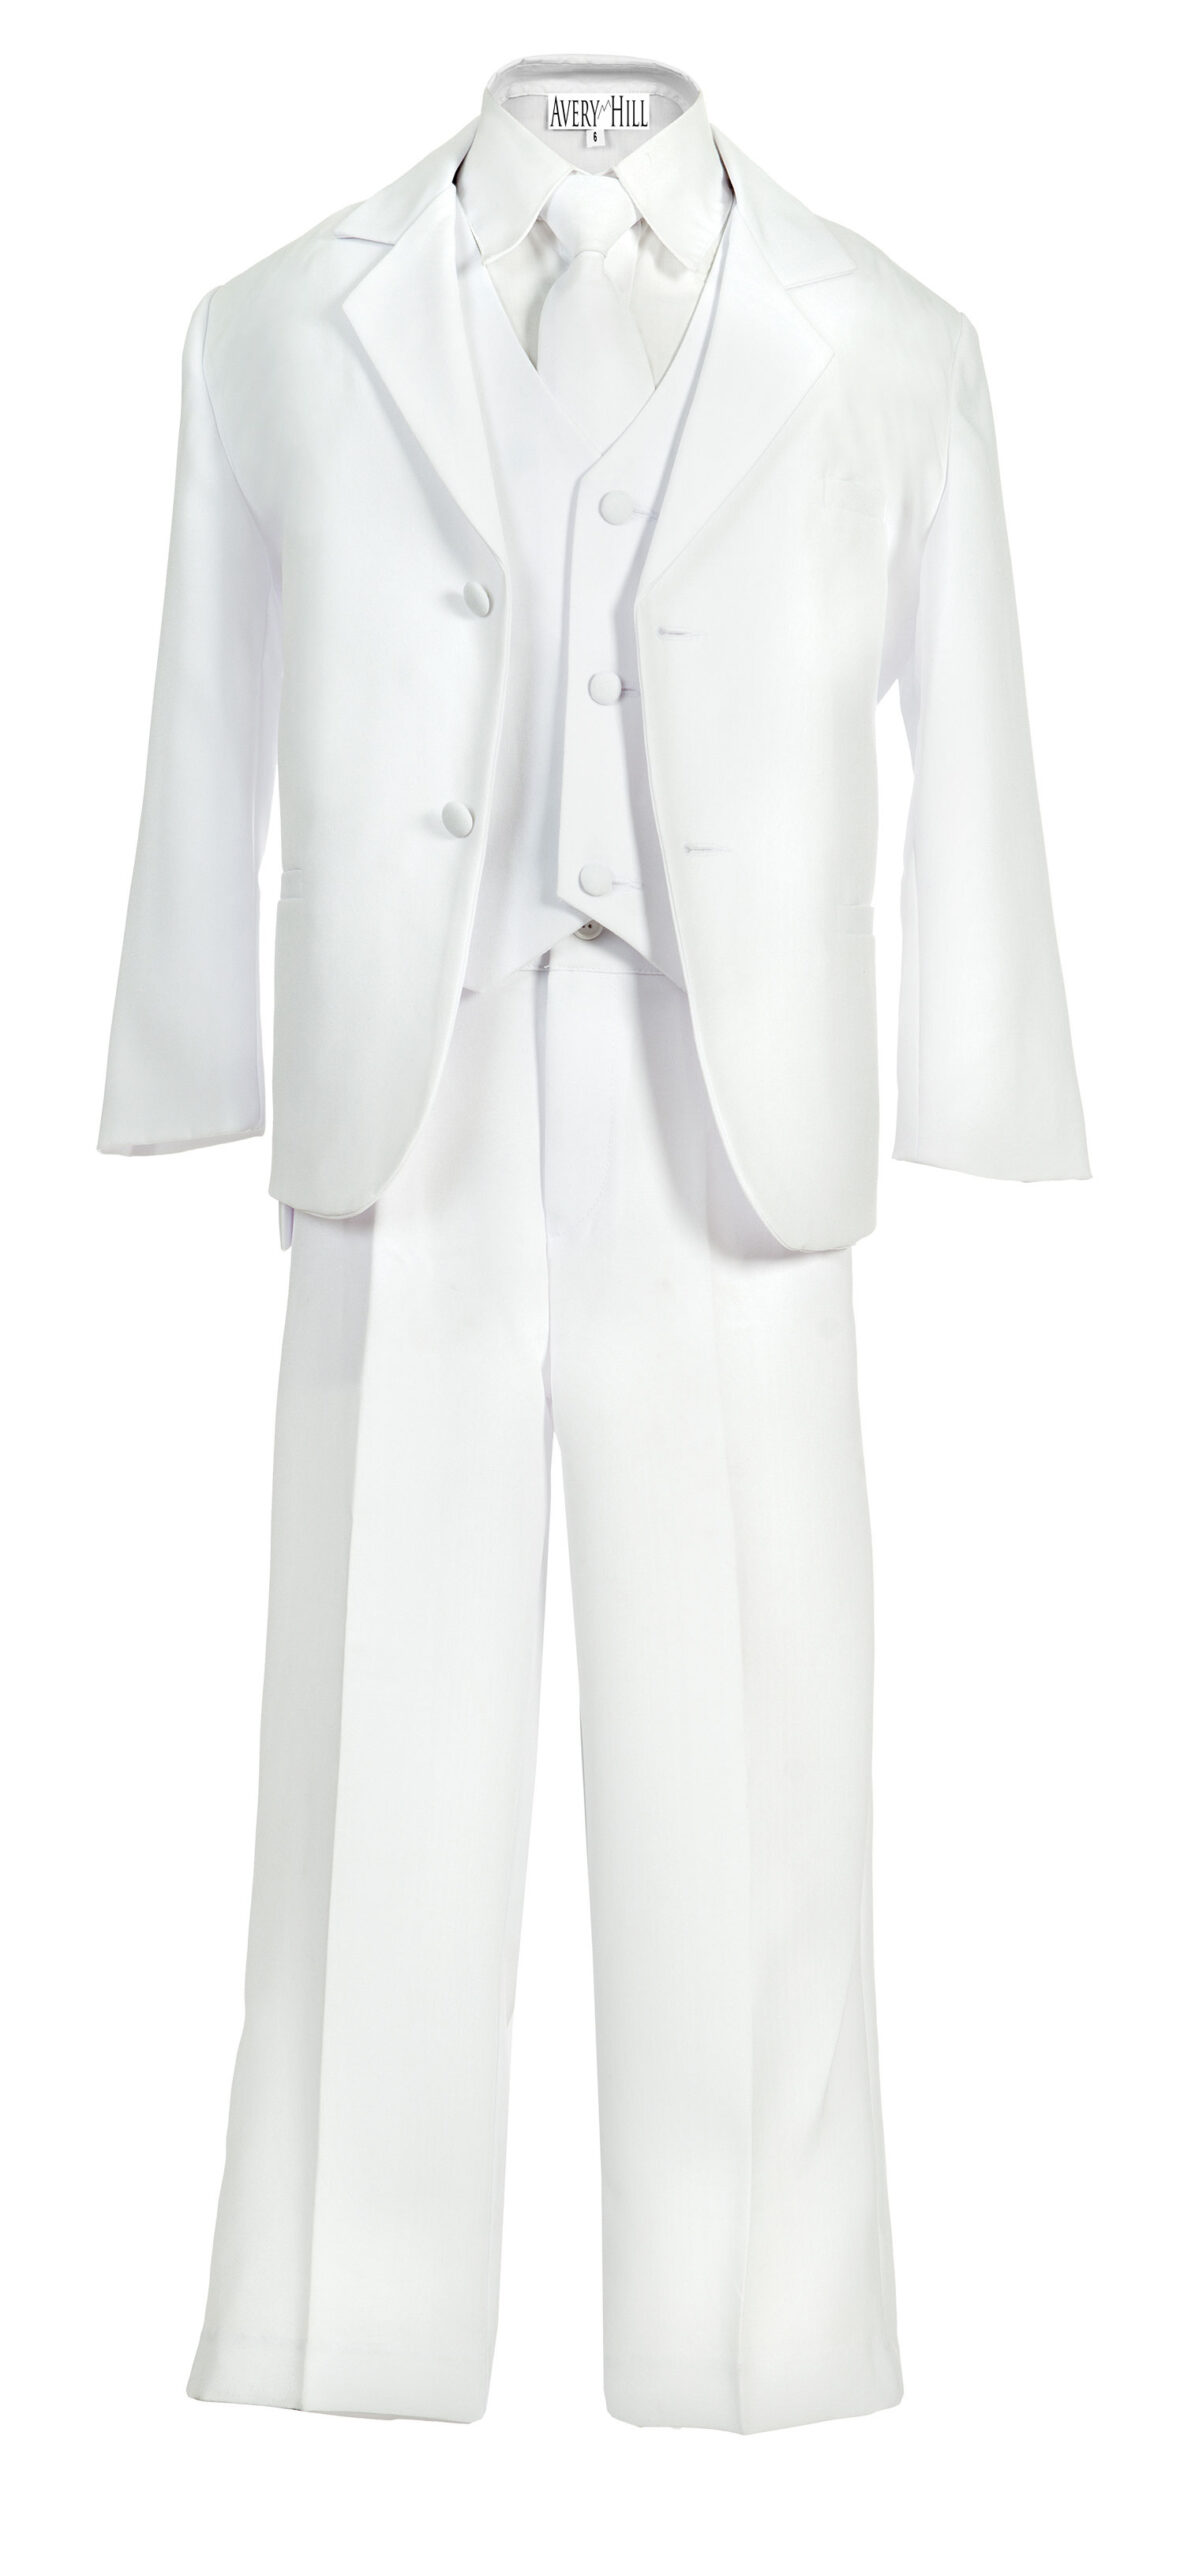 Avery Hill Boys Formal 5 Piece Suit with Shirt and Vest White - 5